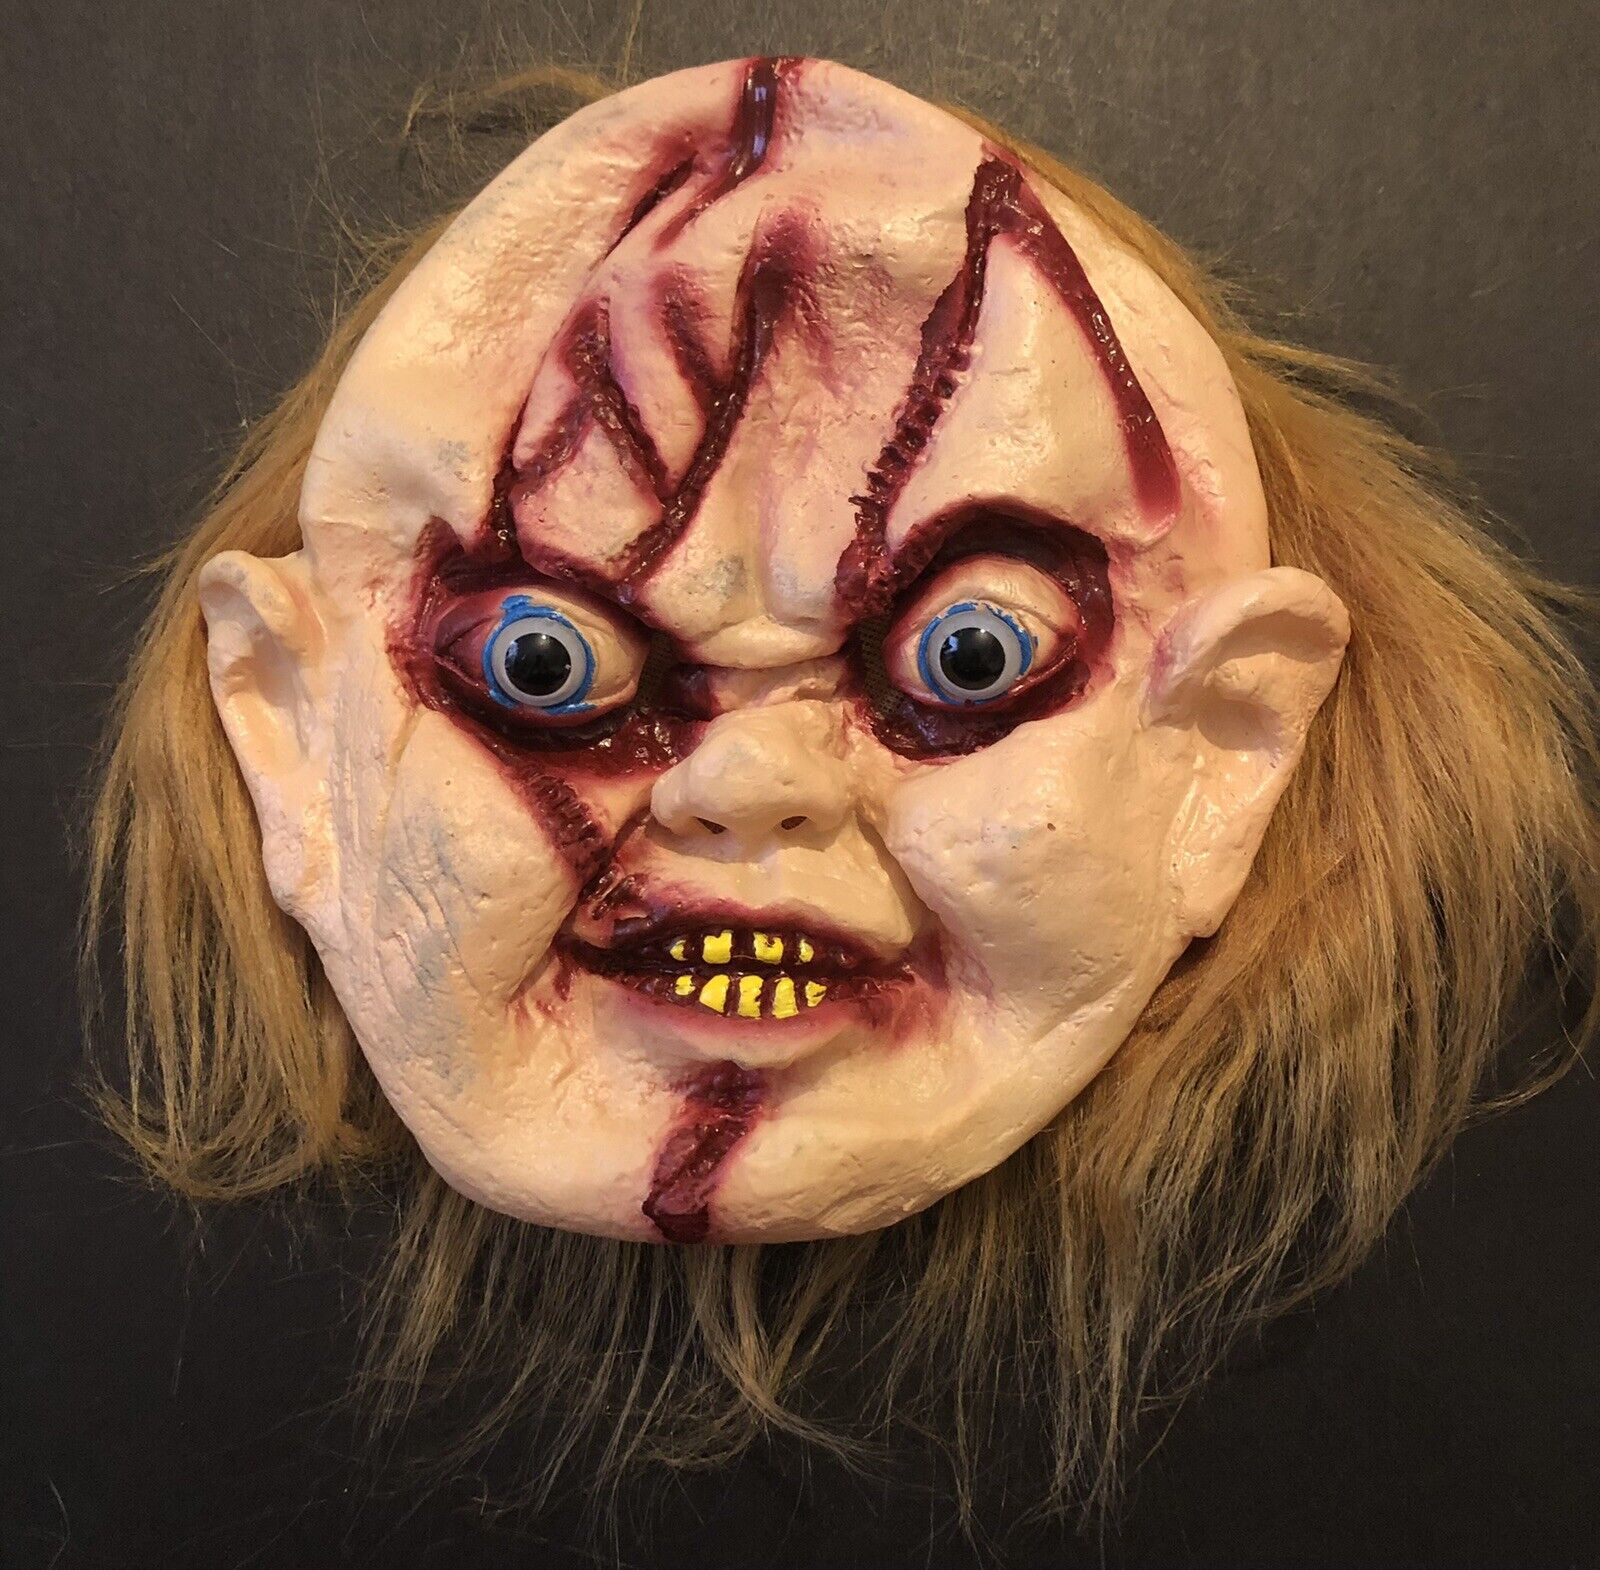 Creepy & Scary Chucky Mask Full Face w/ Hair Dress Up or Theater